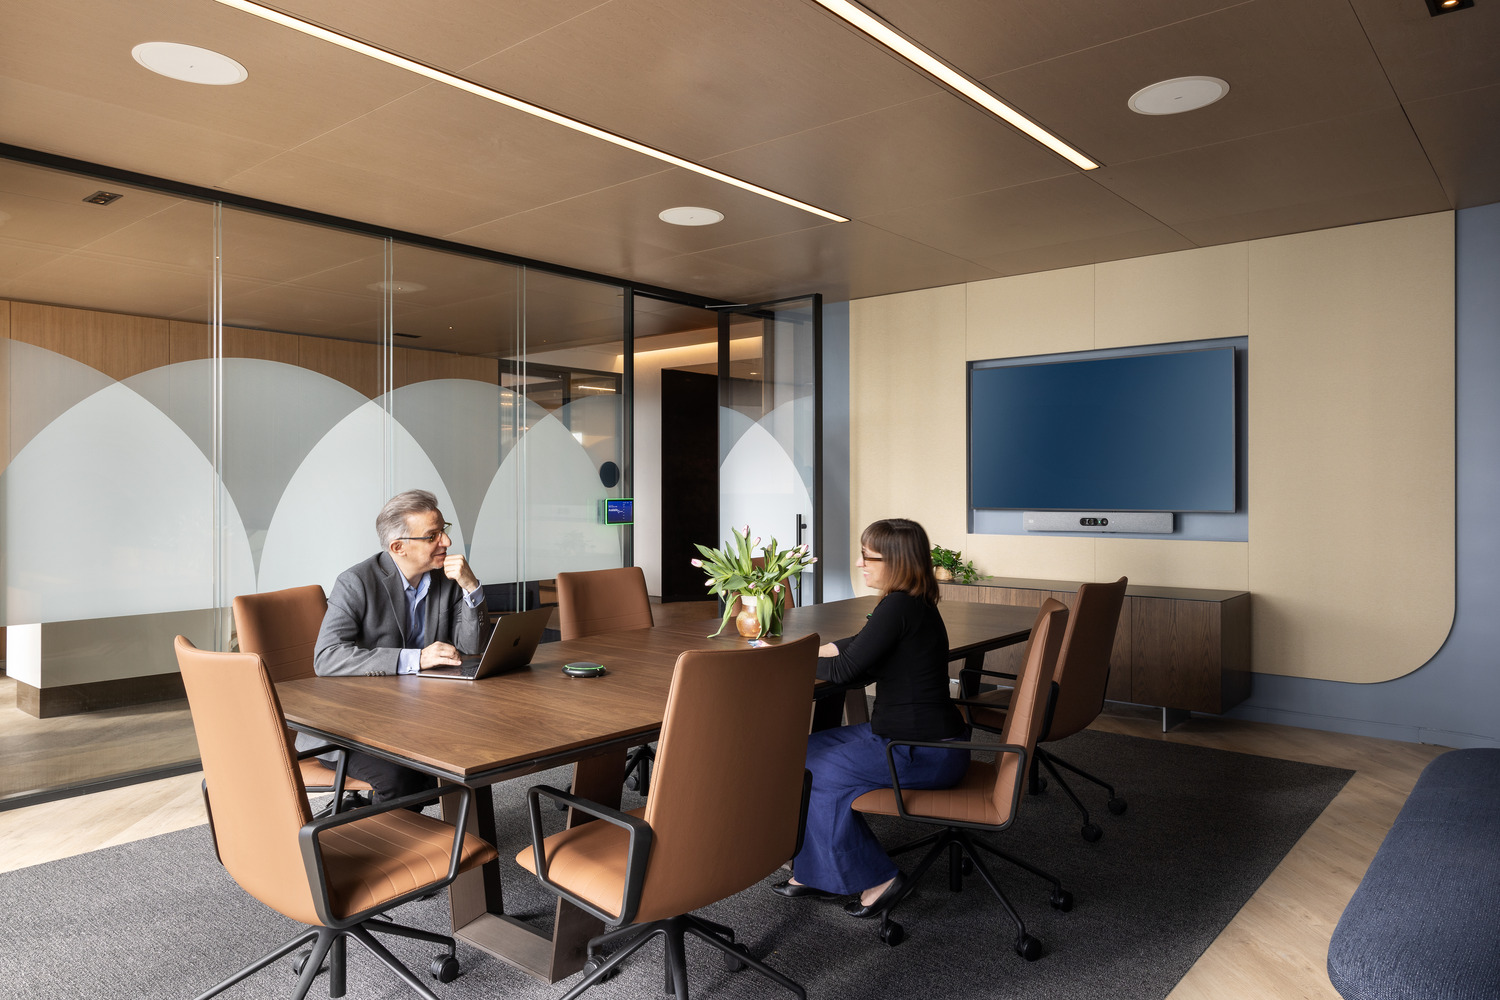 Modern office meeting room with a wooden table, leather chairs, frosted glass partitions, and wooden floor. A flat-screen monitor is mounted on the wall, and two professionals are in discussion, embodying a collaborative workspace aesthetic.